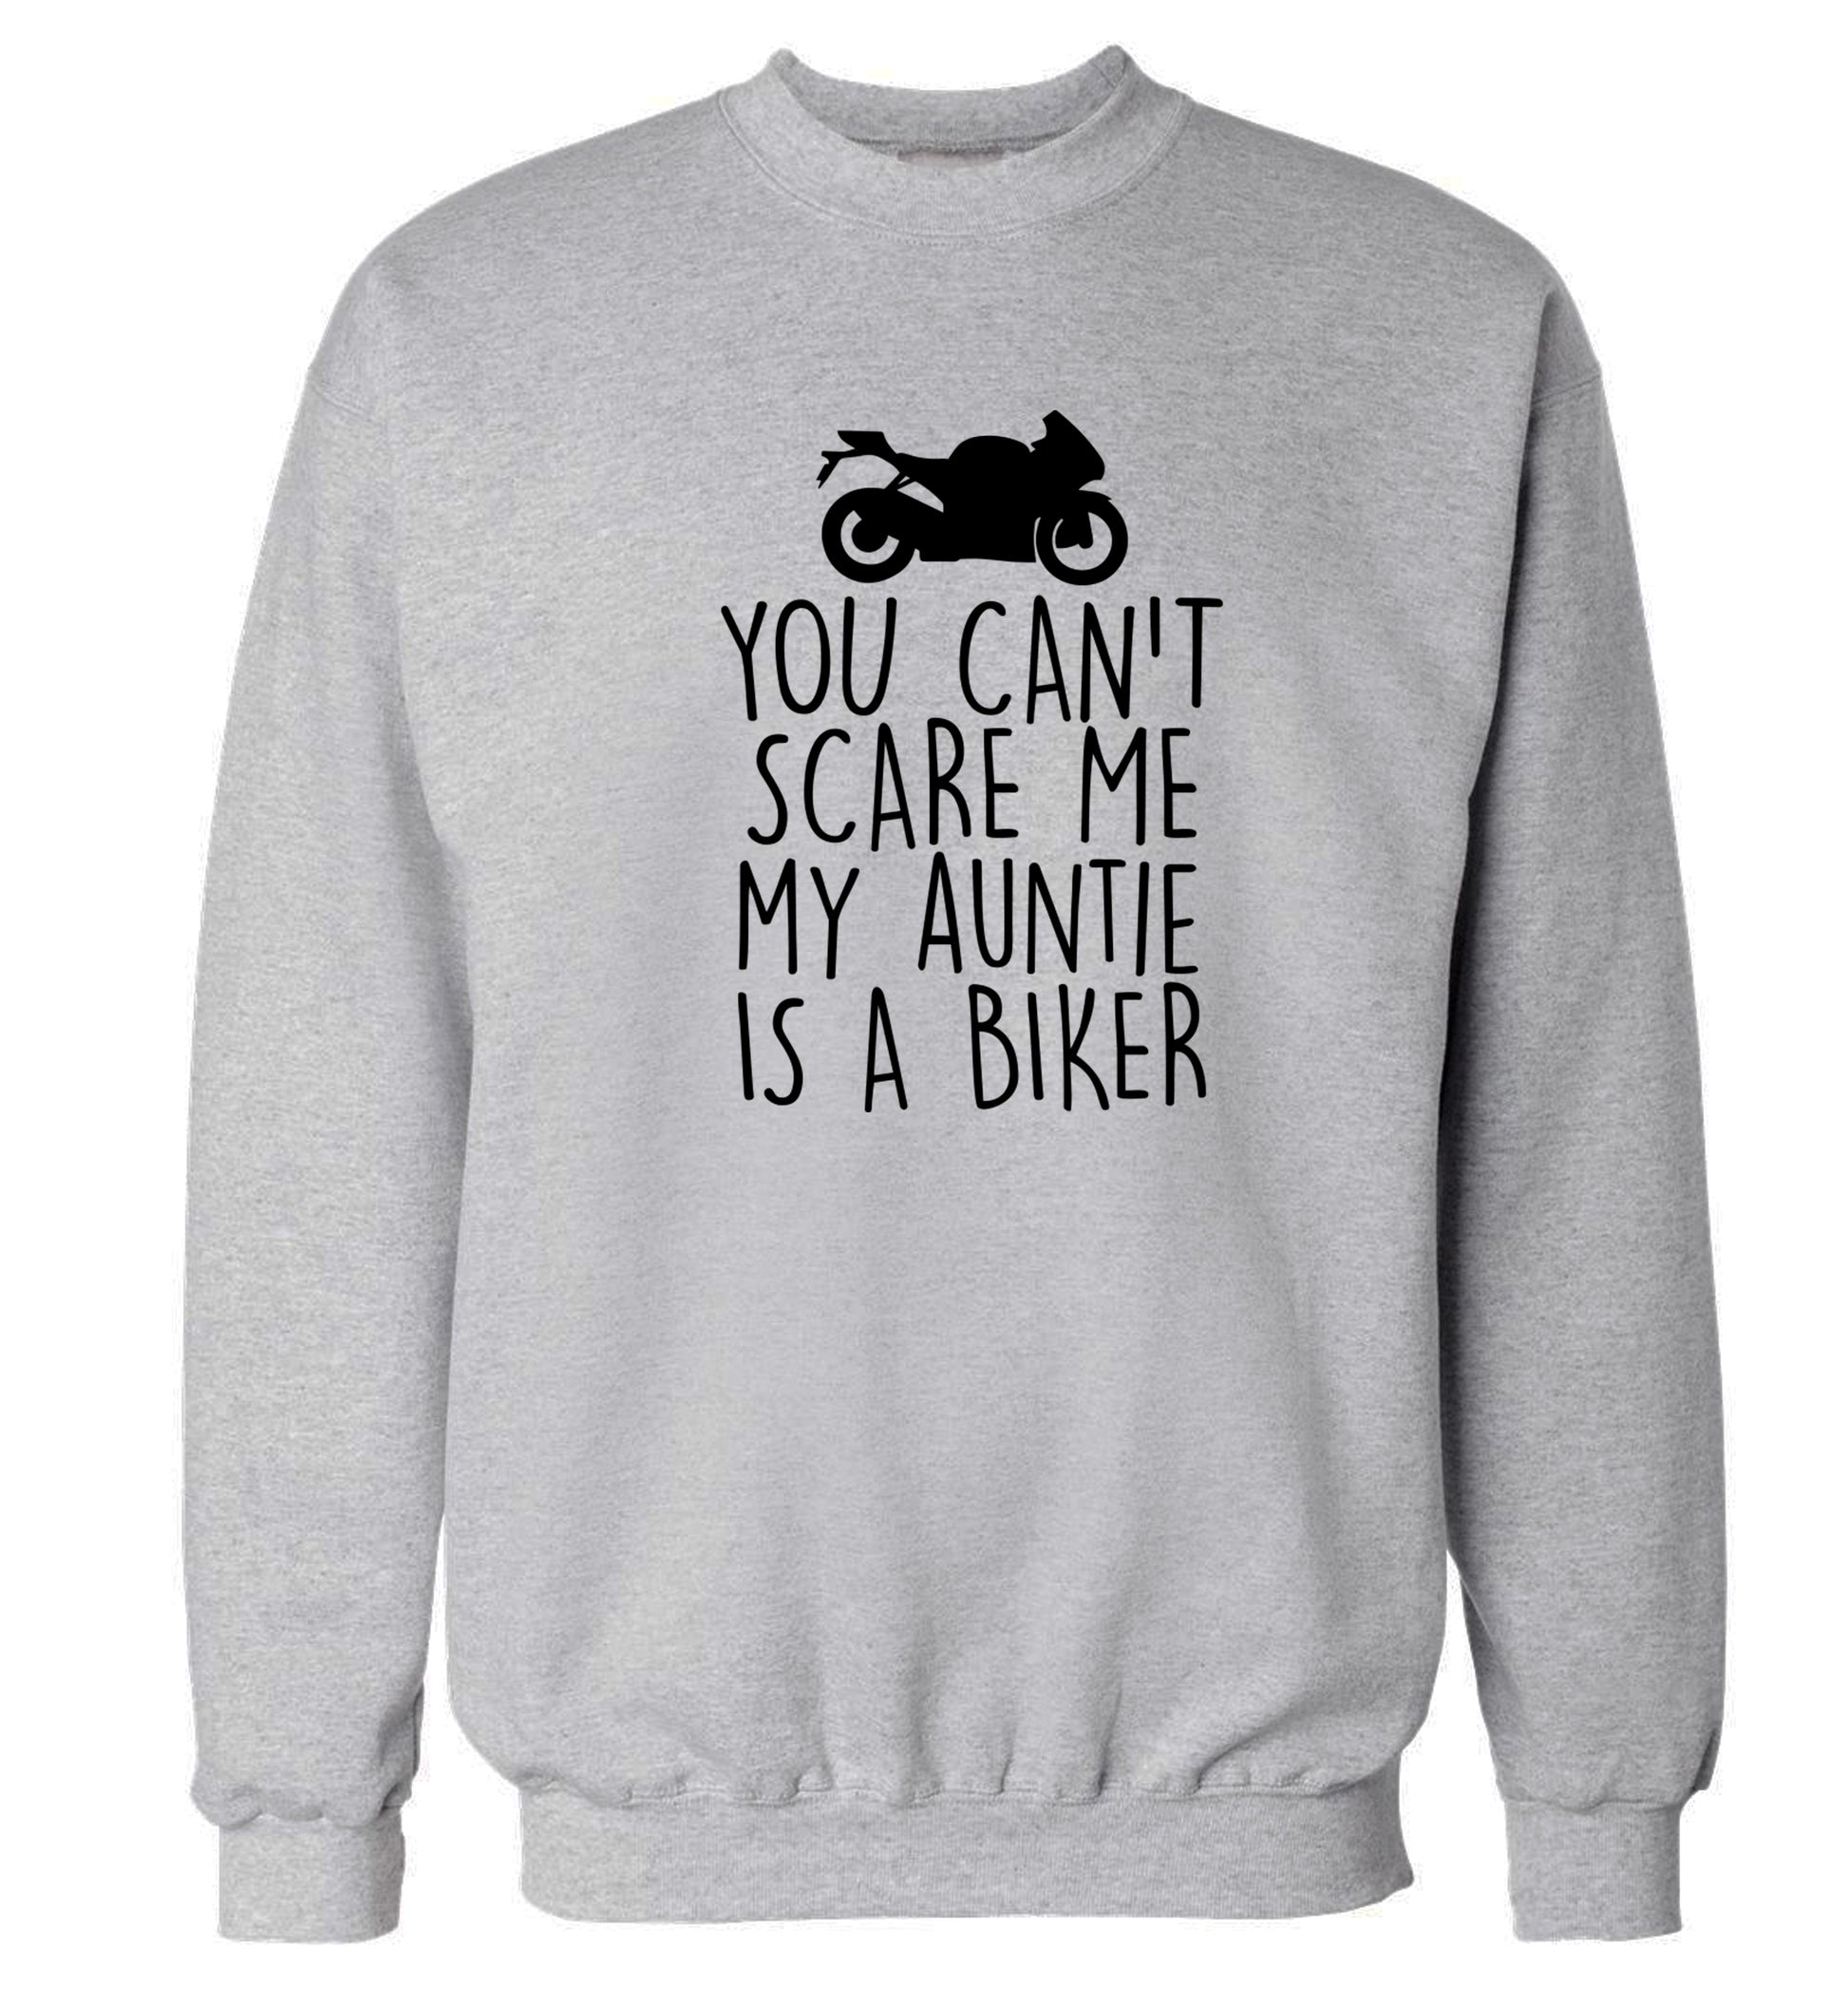 You can't scare me my auntie is a biker Adult's unisex grey Sweater 2XL